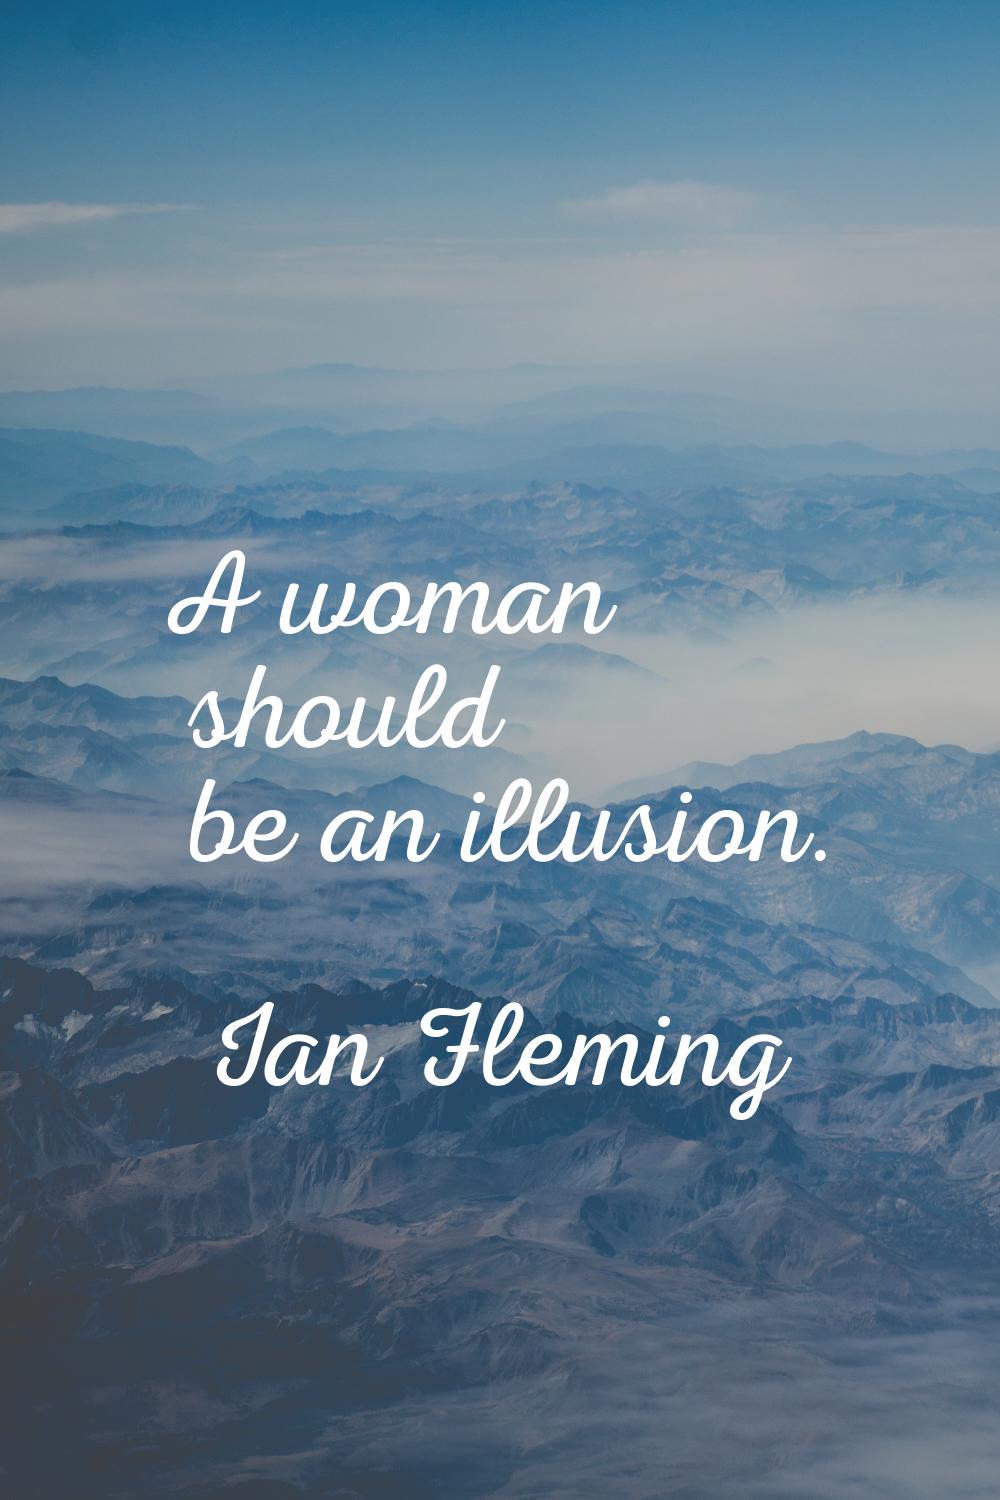 A woman should be an illusion.